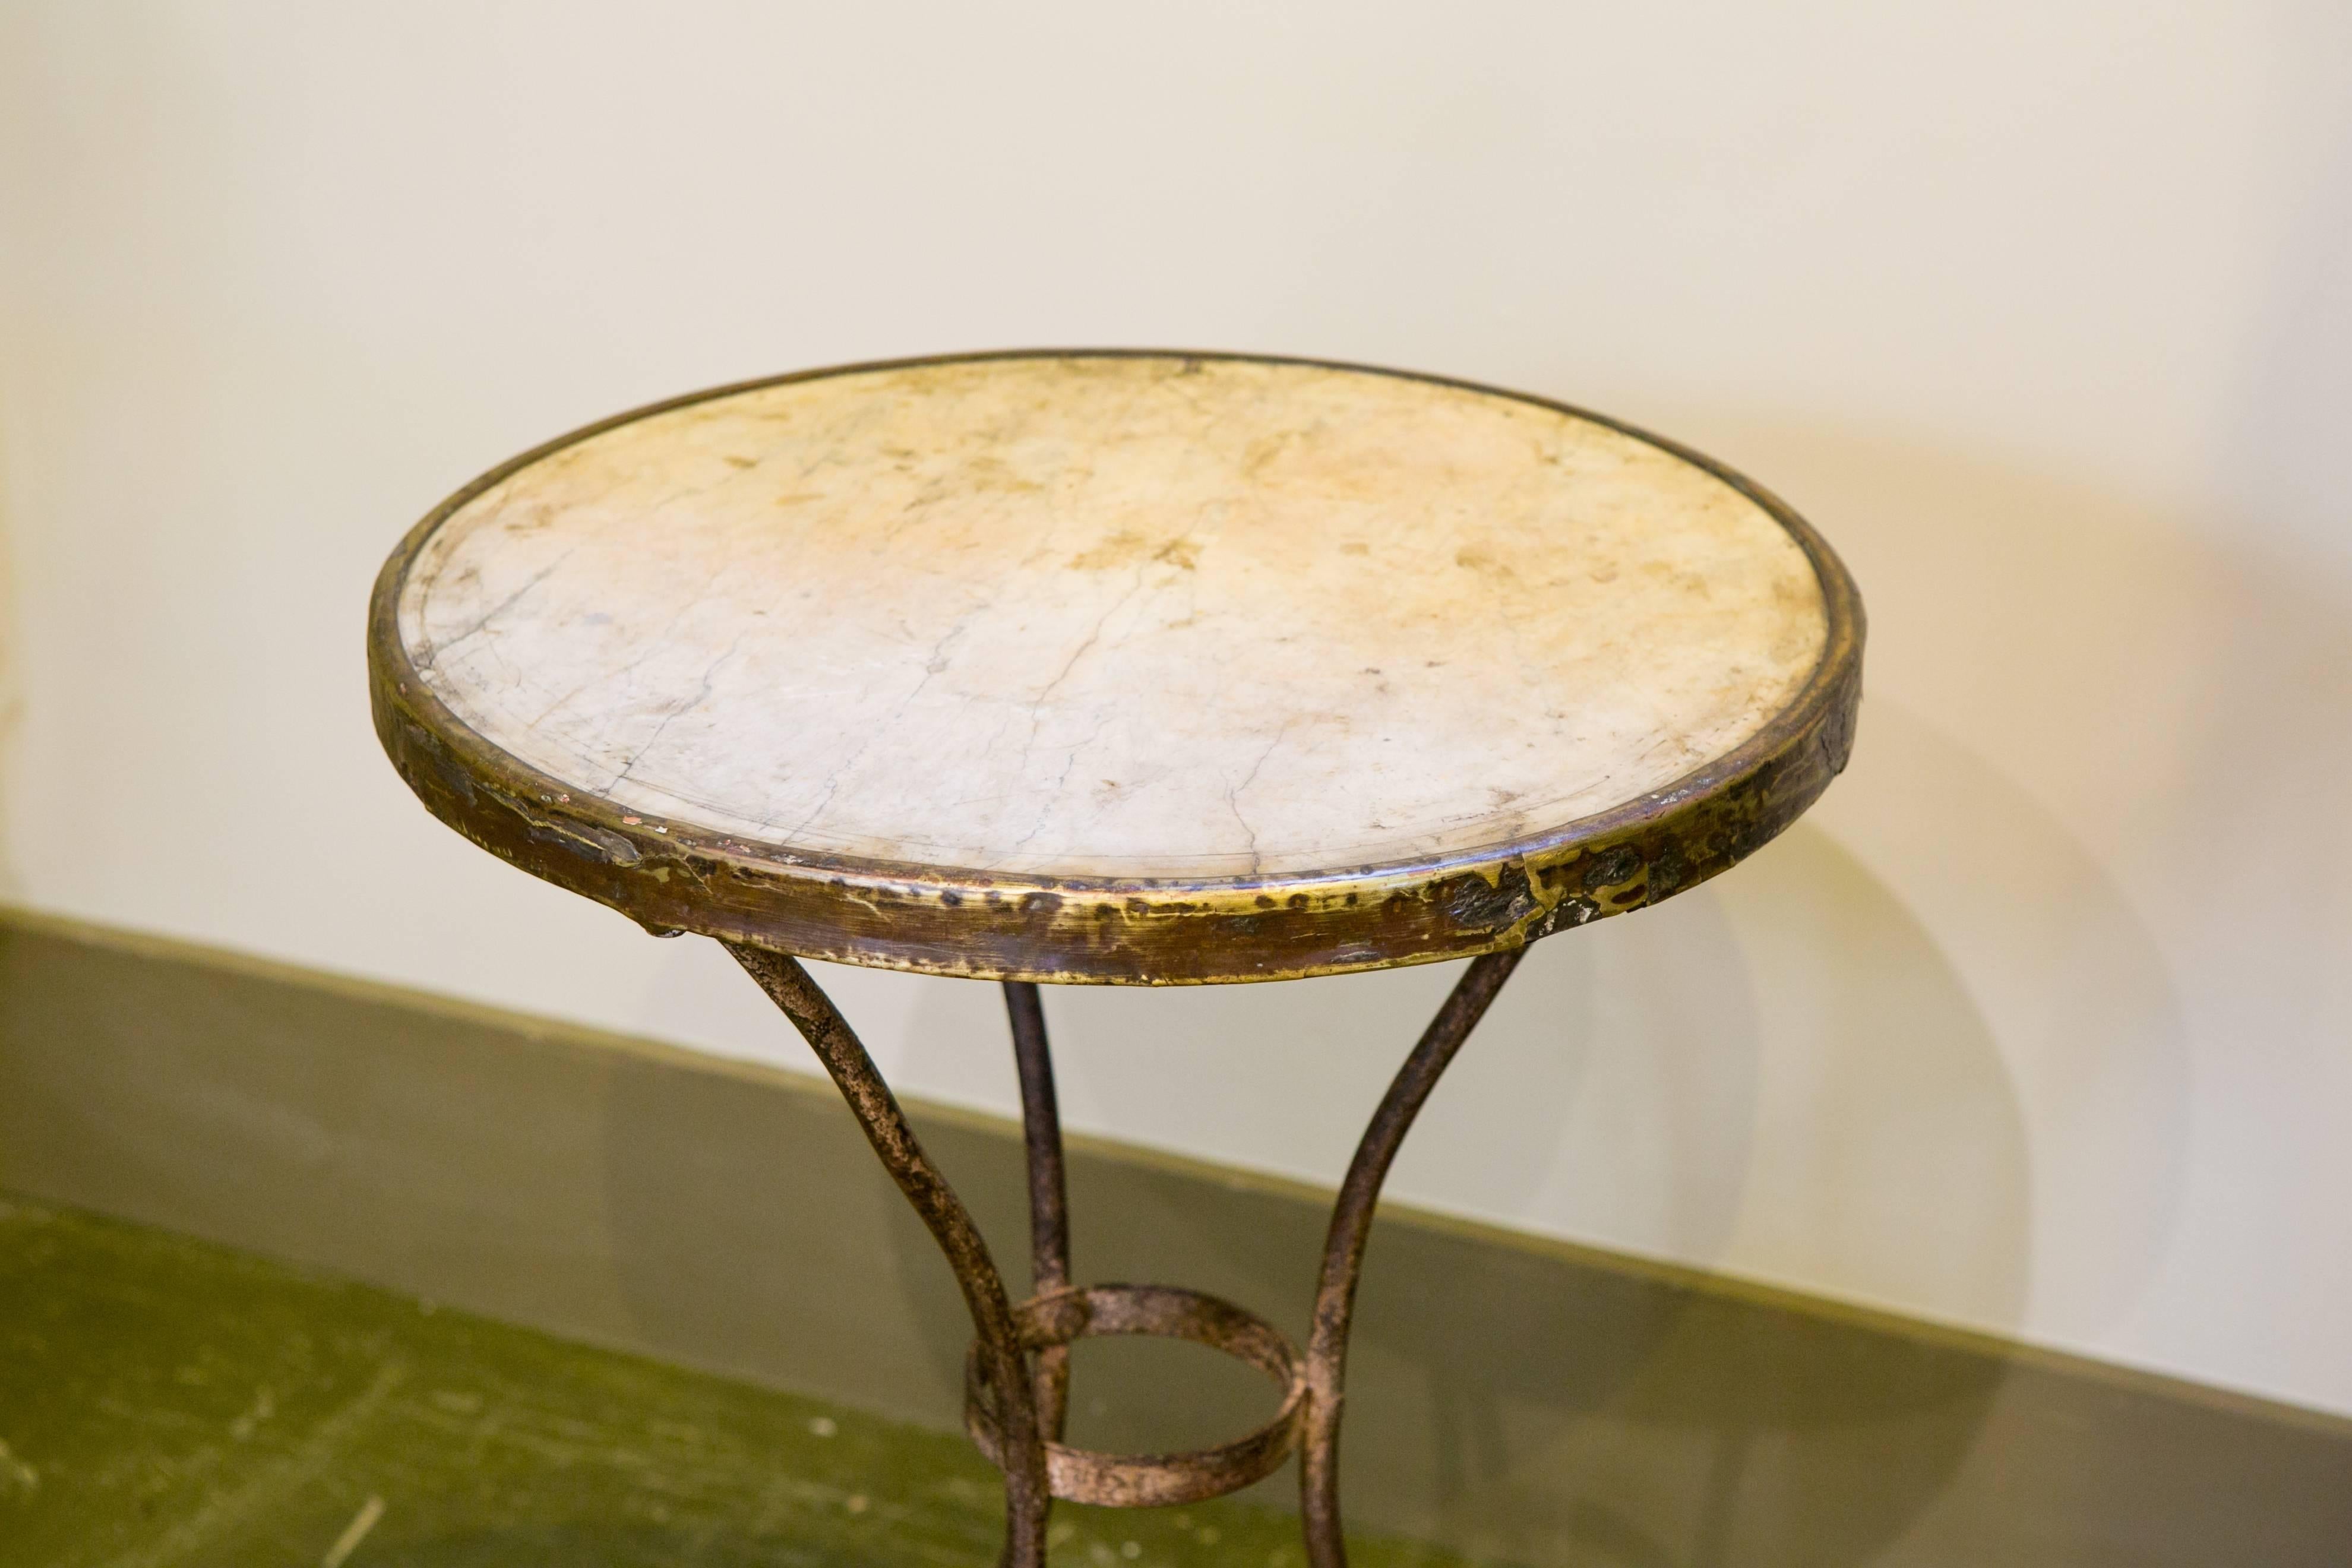 Antique gueridon table with marble top and brass band on an iron base. All original parts. Would make a great bedside table. From France, circa 1910.